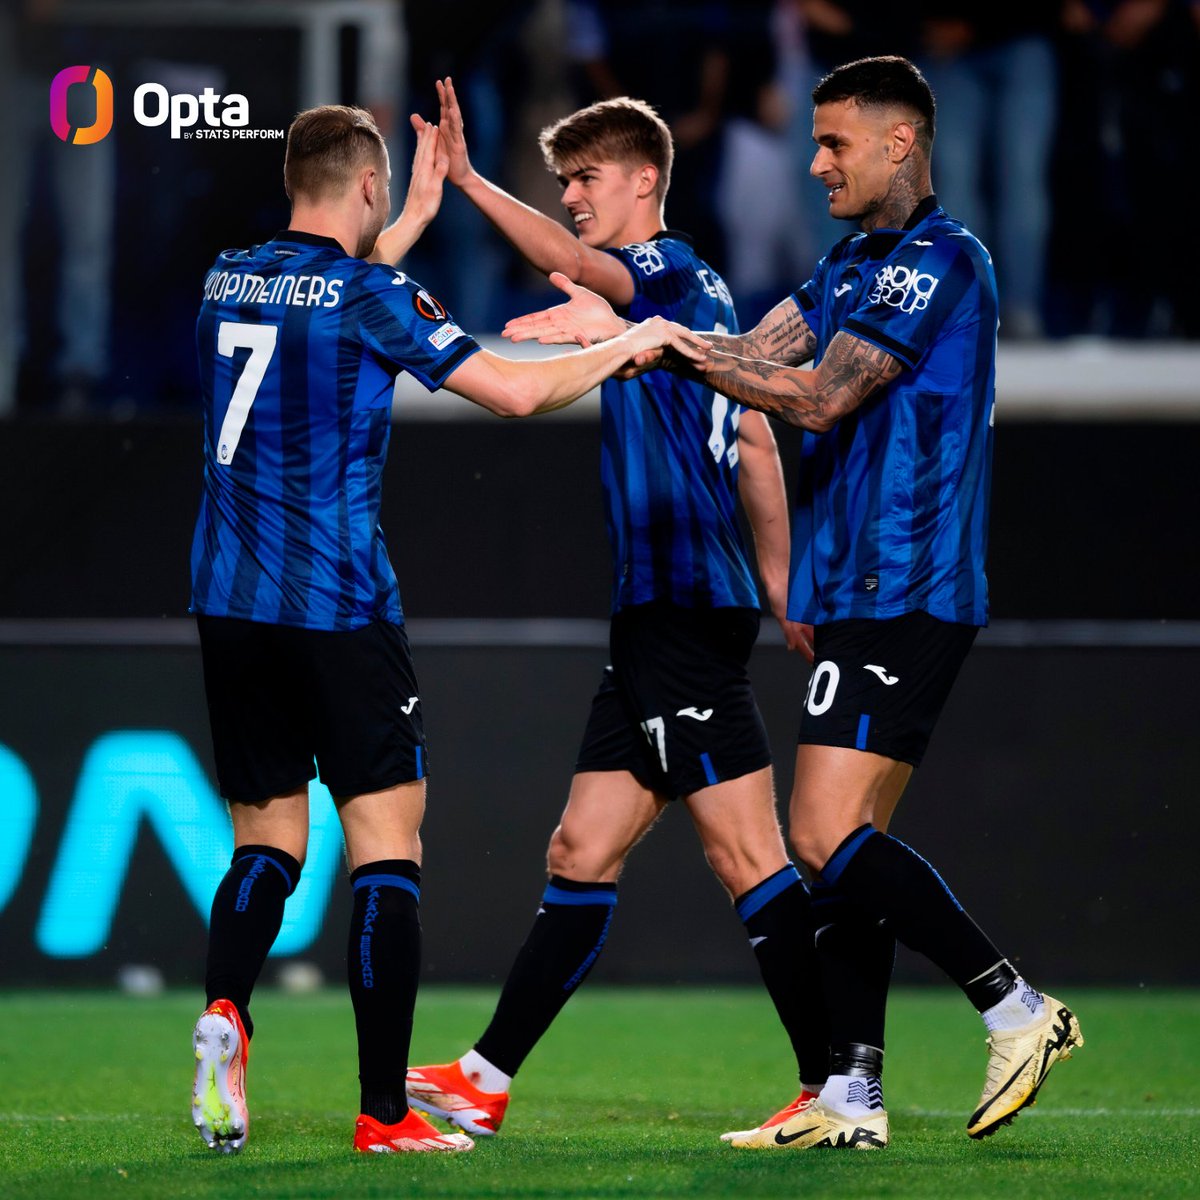 22x3 - Atalanta's players involved in at least 22 goals (goals+assist): 22 - Charles De Ketelaere (13G + 9A) 22 - Gianluca Scamacca (17G + 5A) 22 - Teun Koopmeiners (15G + 7A) Only Man City and Bayer Leverkusen (4) have more in the Big-5 Euro leagues in 23/24 all comps. Trio.